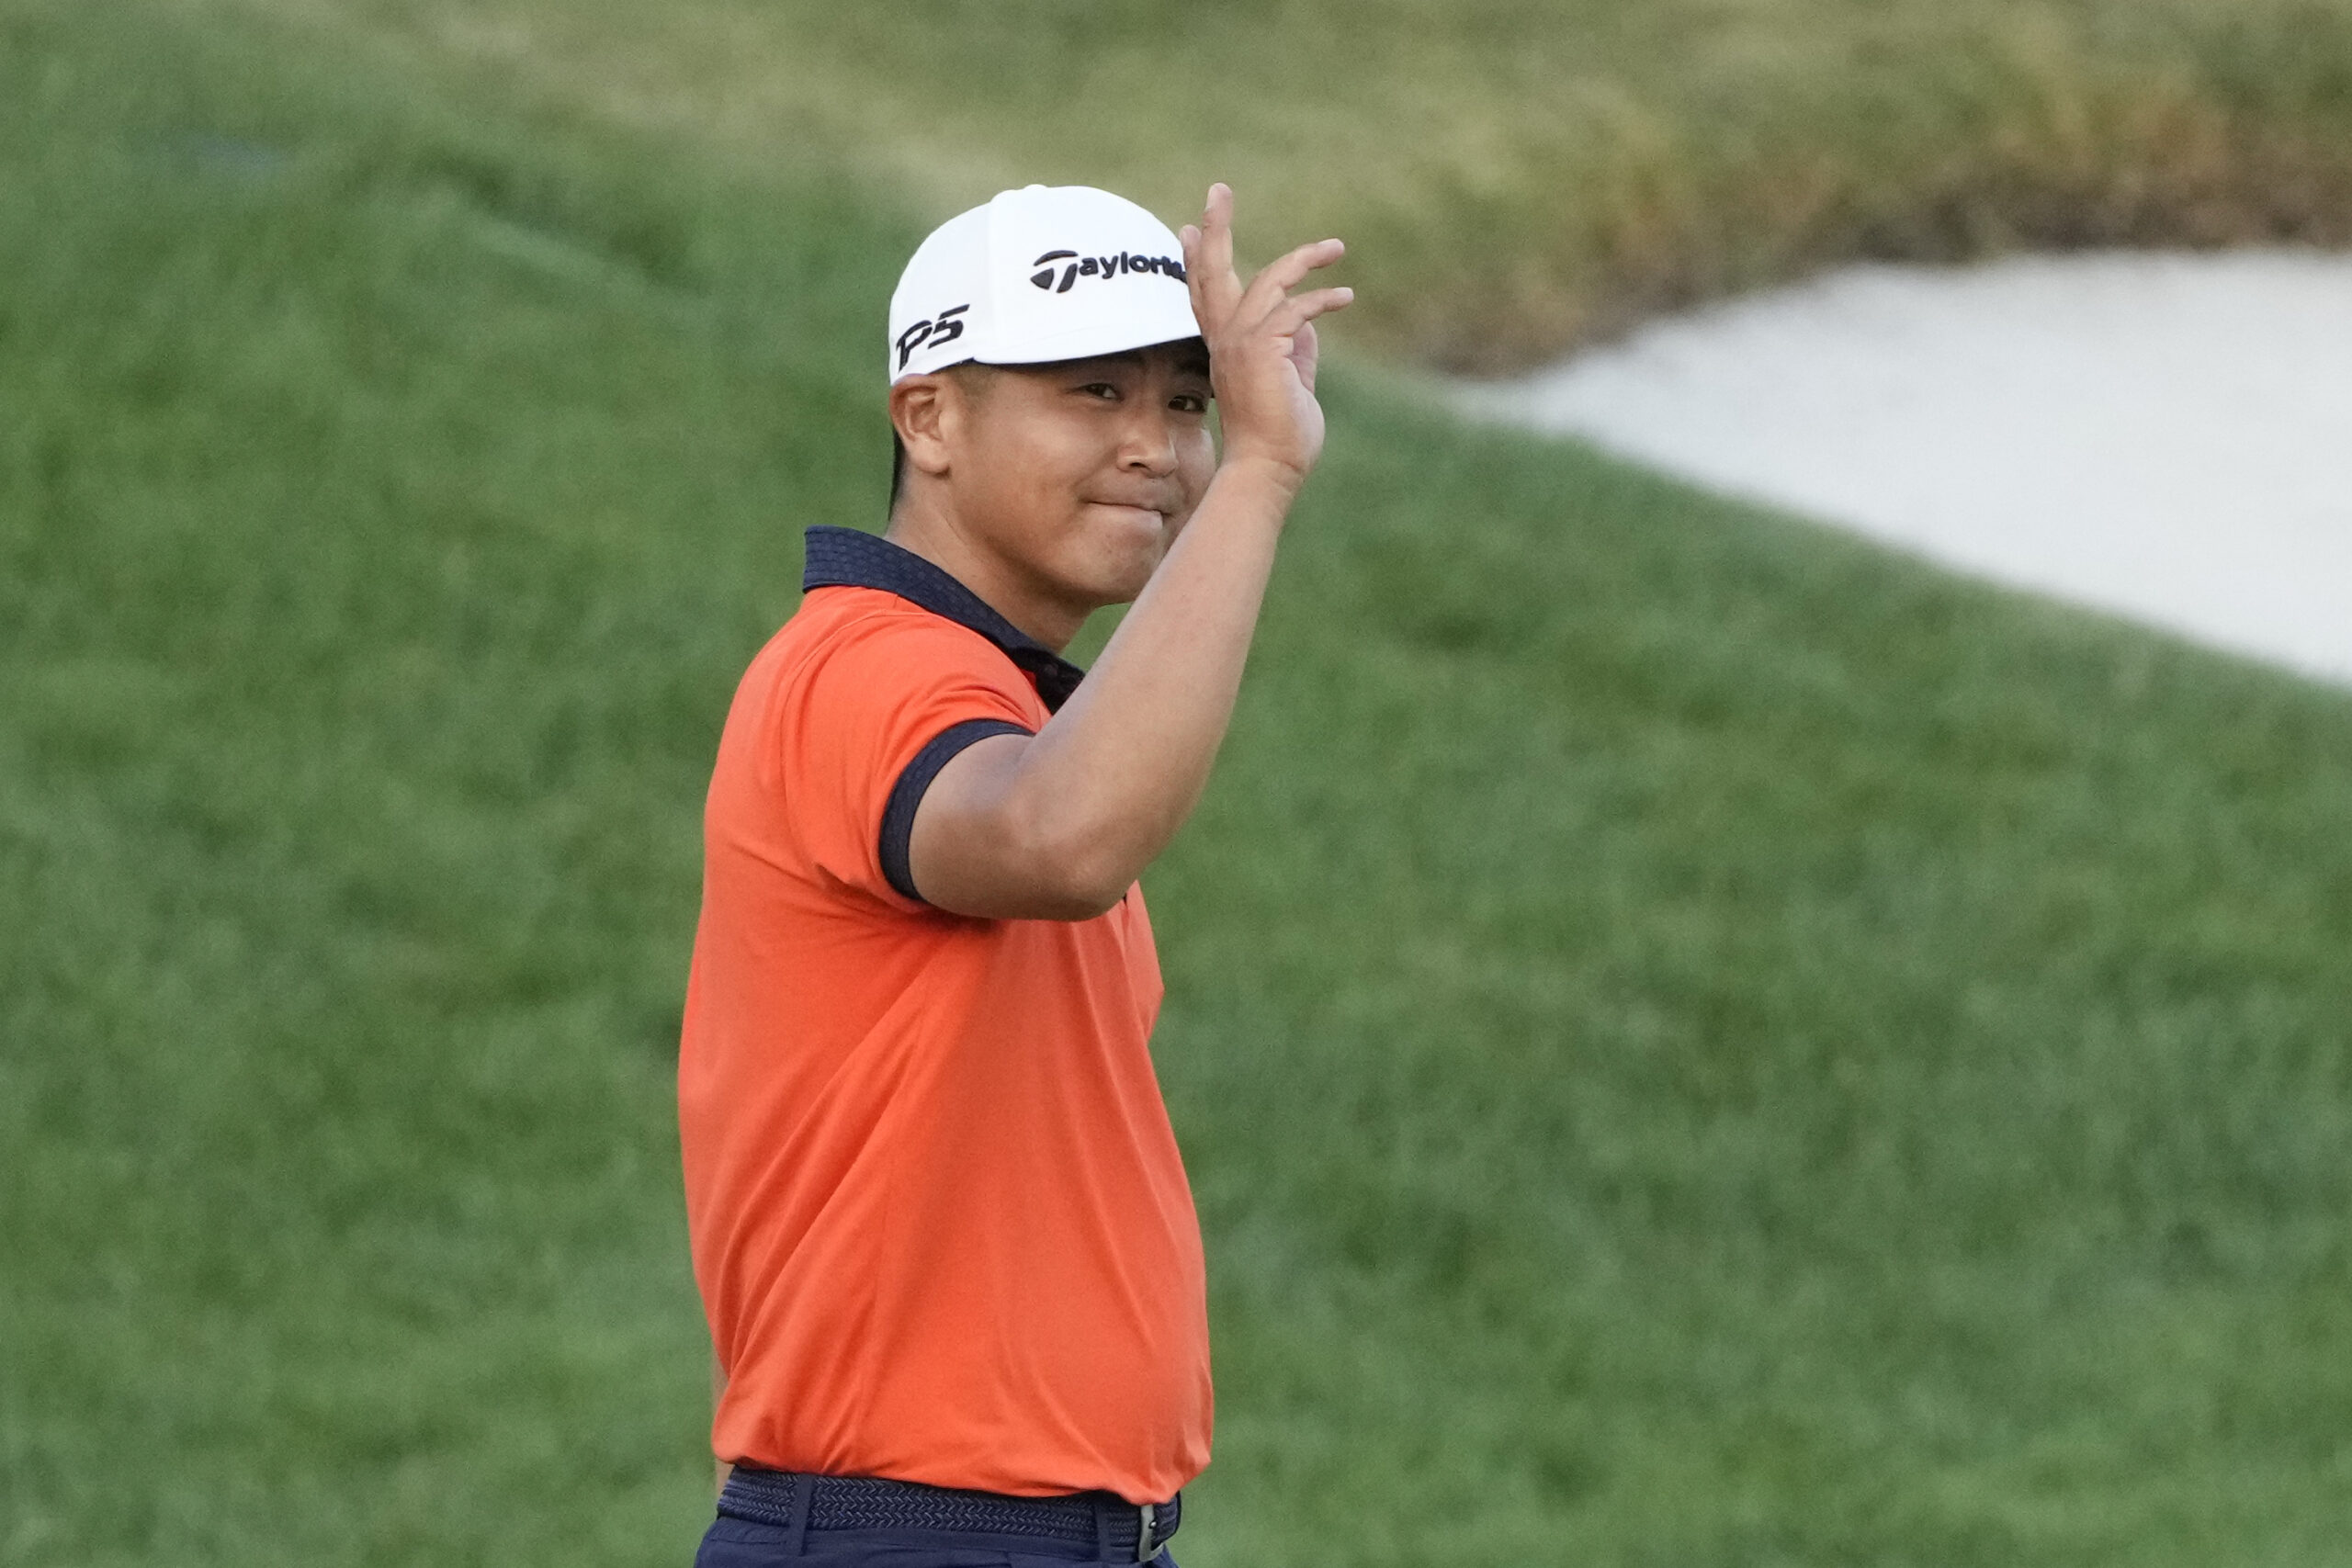 Arnold Palmer 2023 R3 - Kurt Kitayama waves to the gallery after sinking a birdie putt on the 18th hole during third round of the Arnold Palmer Invitational golf tournament